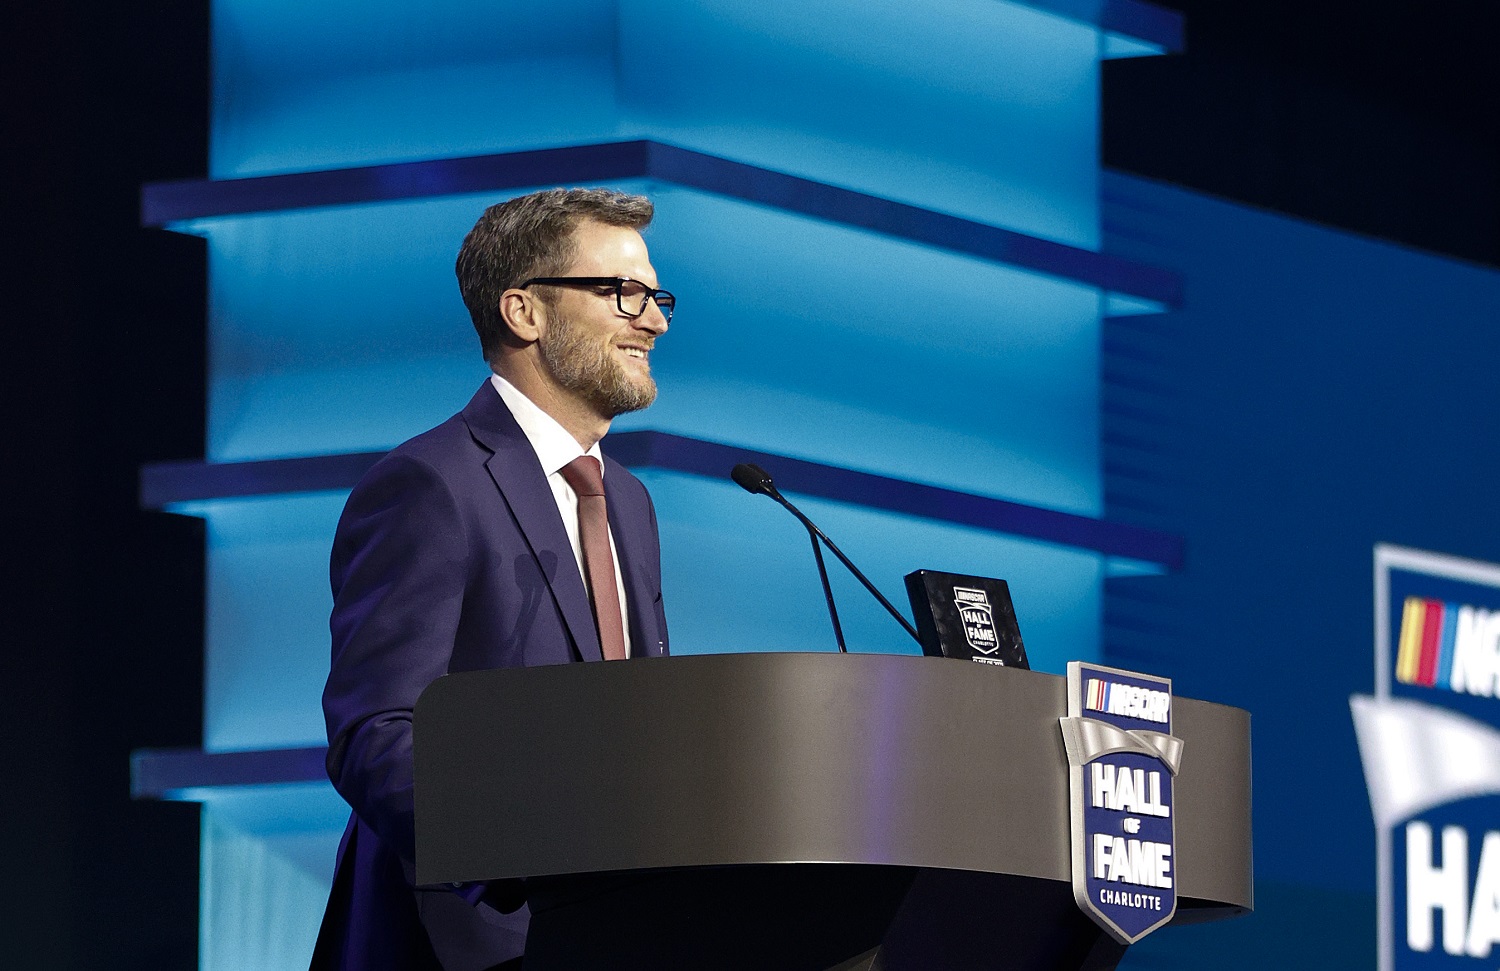 NASCAR Hall of Fame inductee Dale Earnhardt Jr. speaks during the Induction ceremony at the NASCAR Hall of Fame on Jan. 21, 2022.